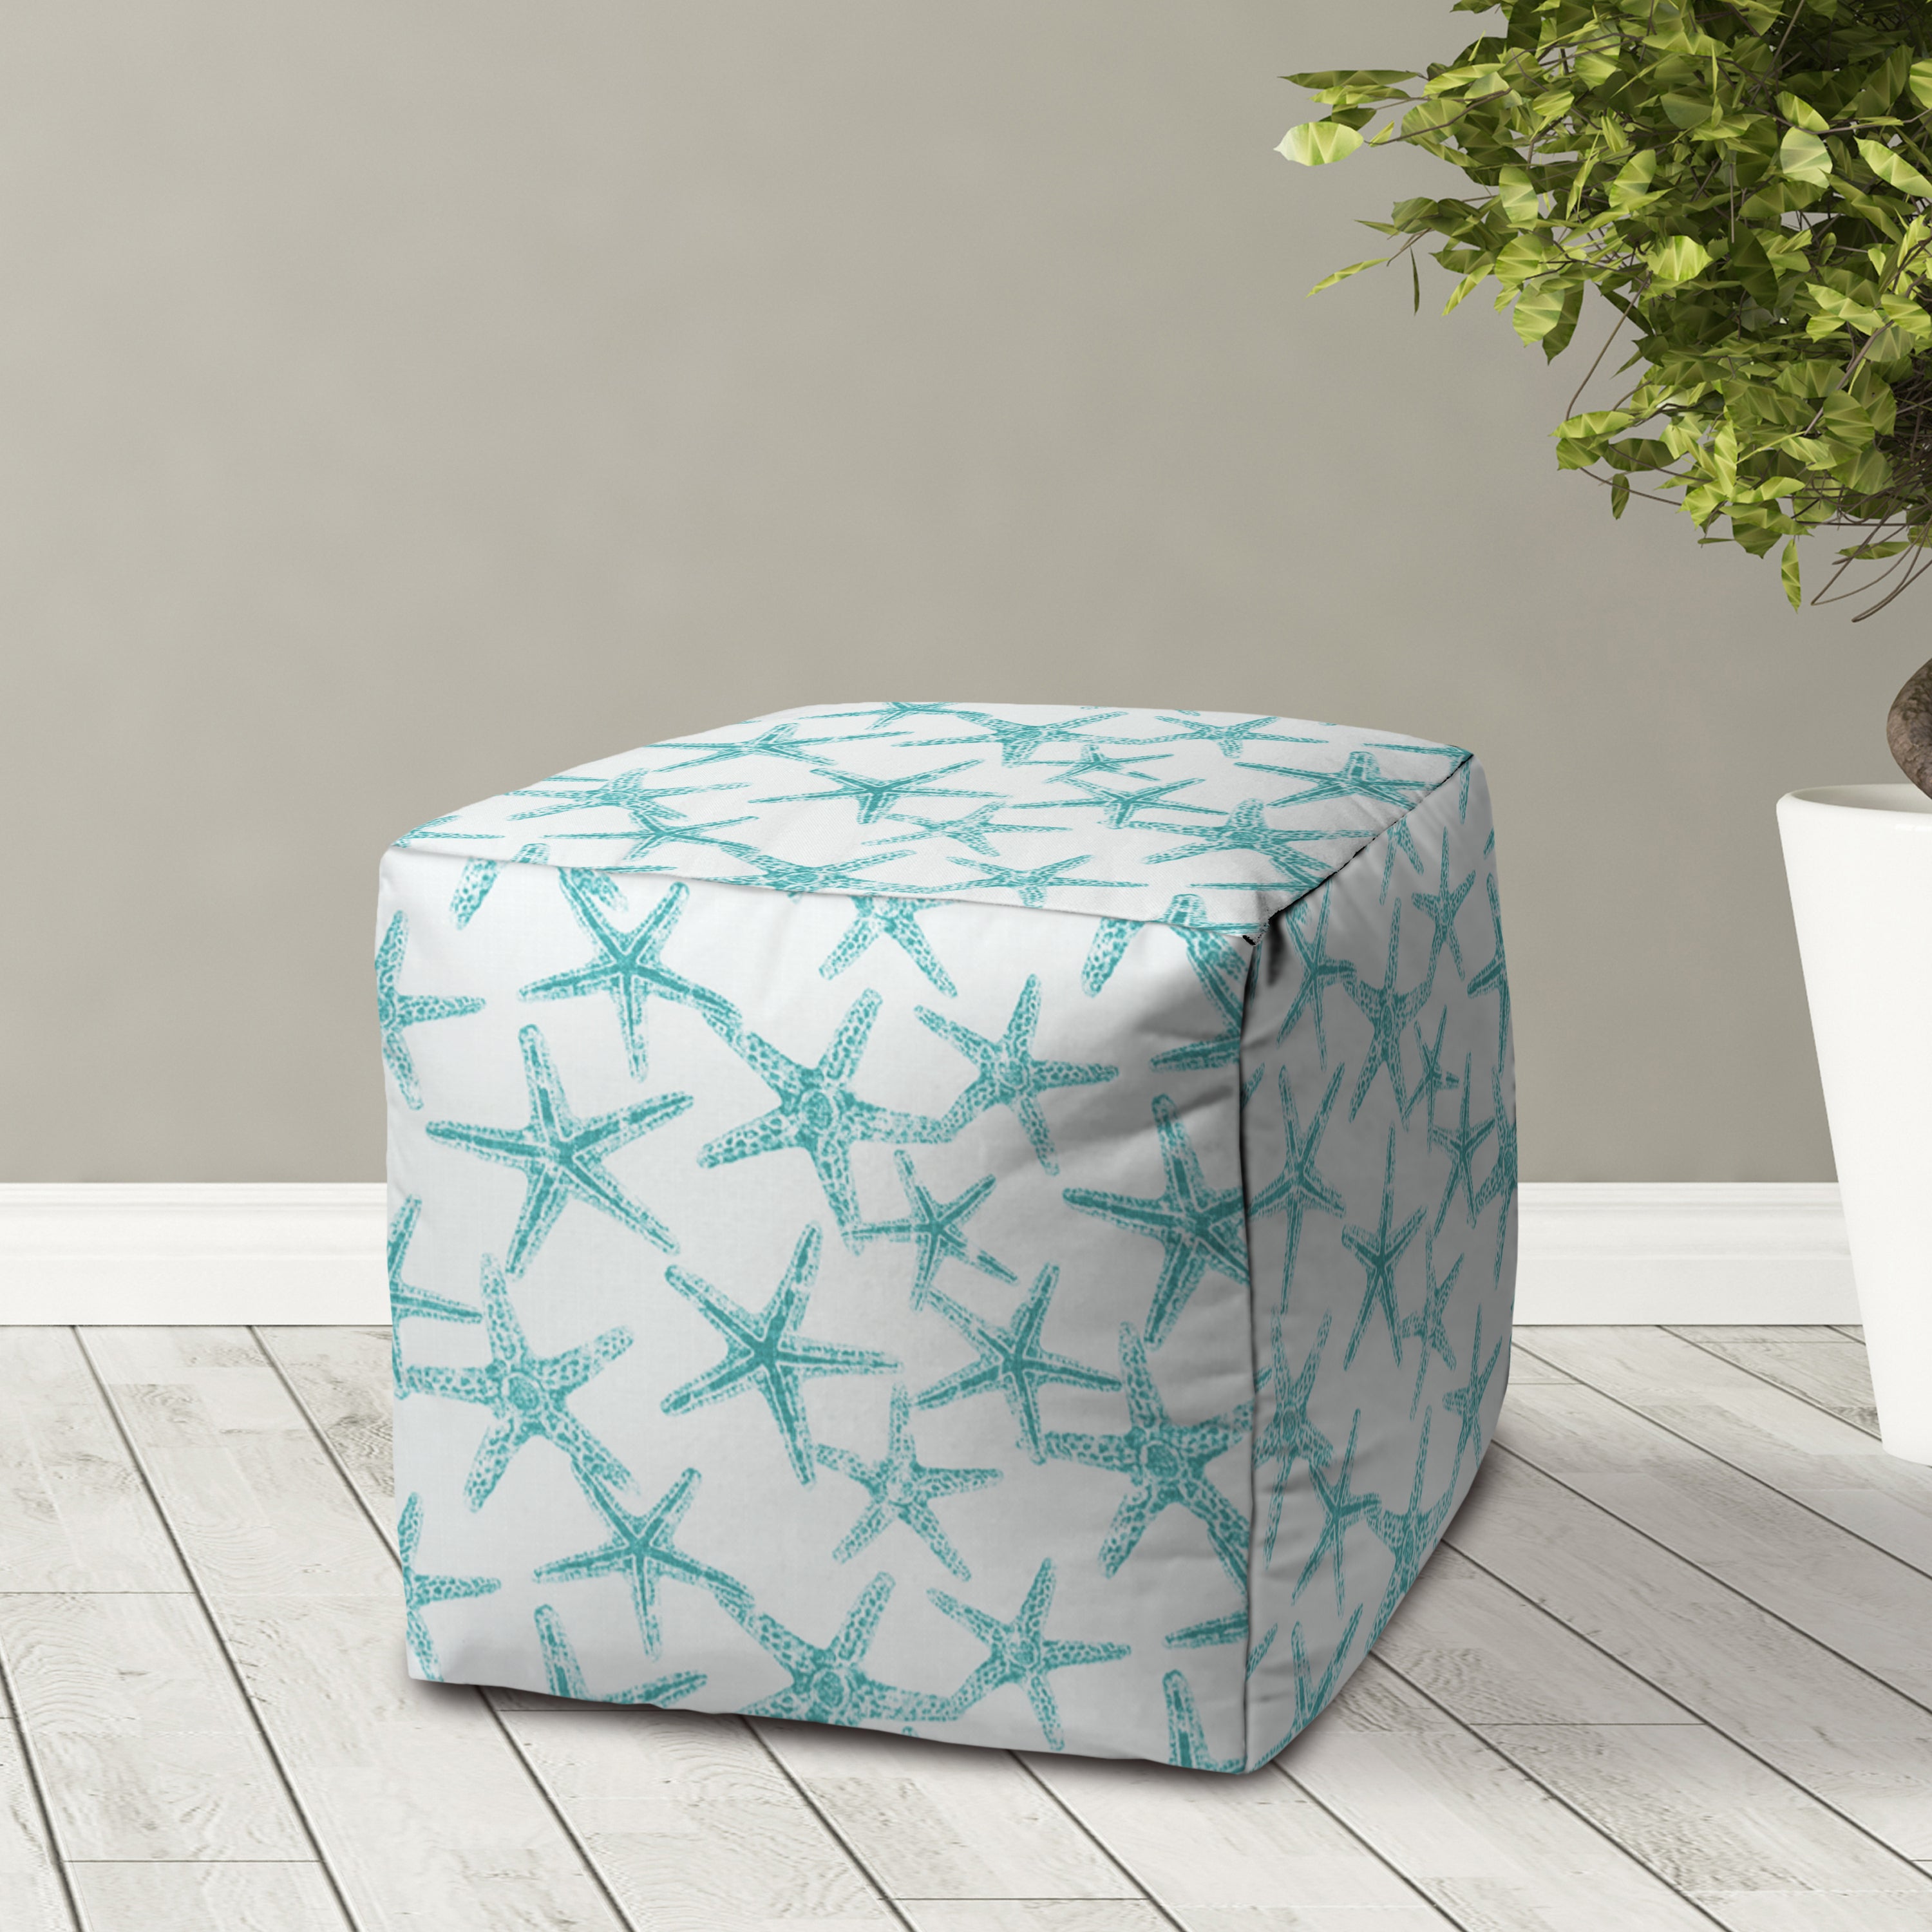 Turquoise Indoor/Outdoor Pouf - Zipper Cover Only - 17 x 17 Cube